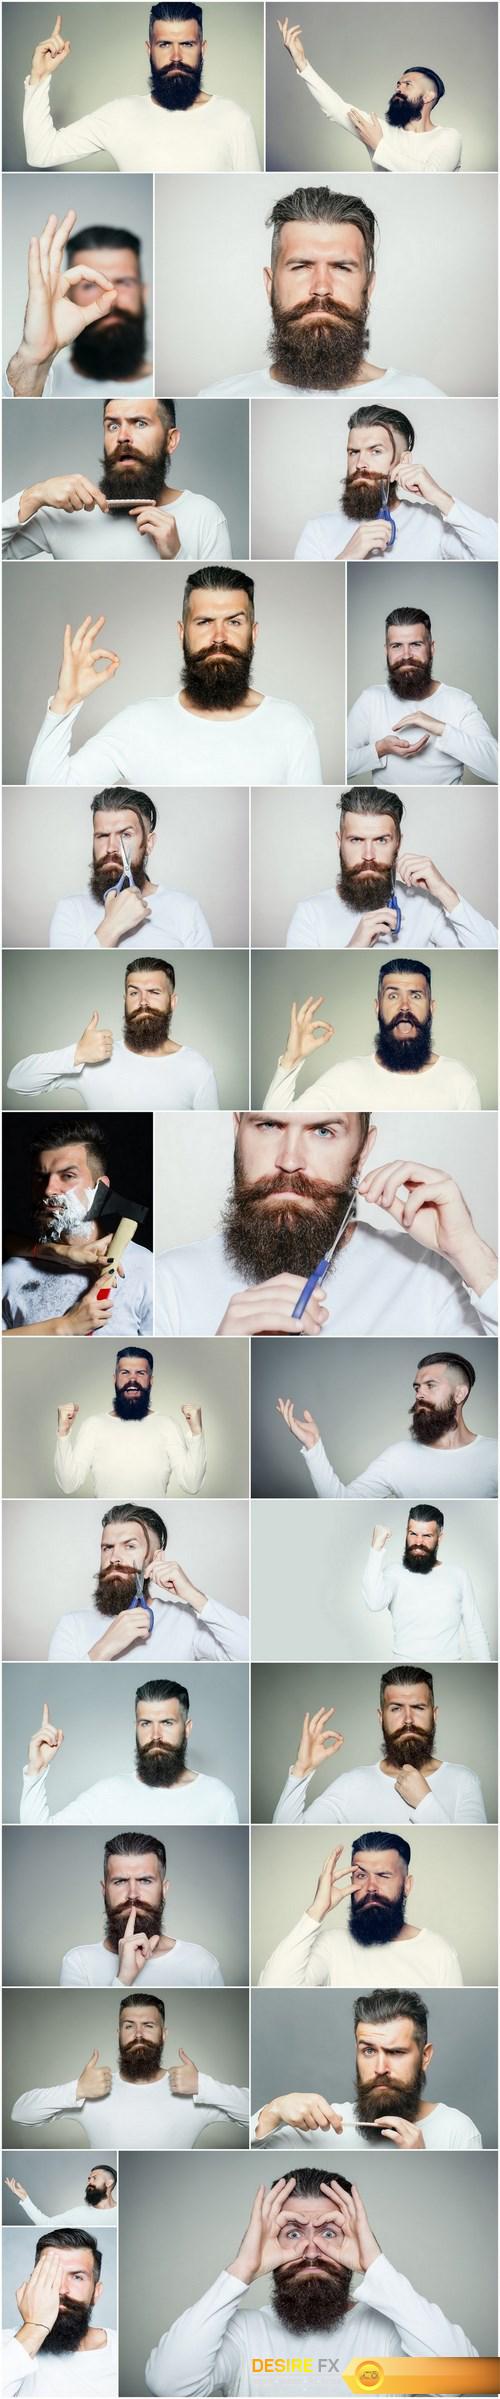 Man with Beard, Brutal Style, Hipster - 27xUHQ JPEG Photo Stock